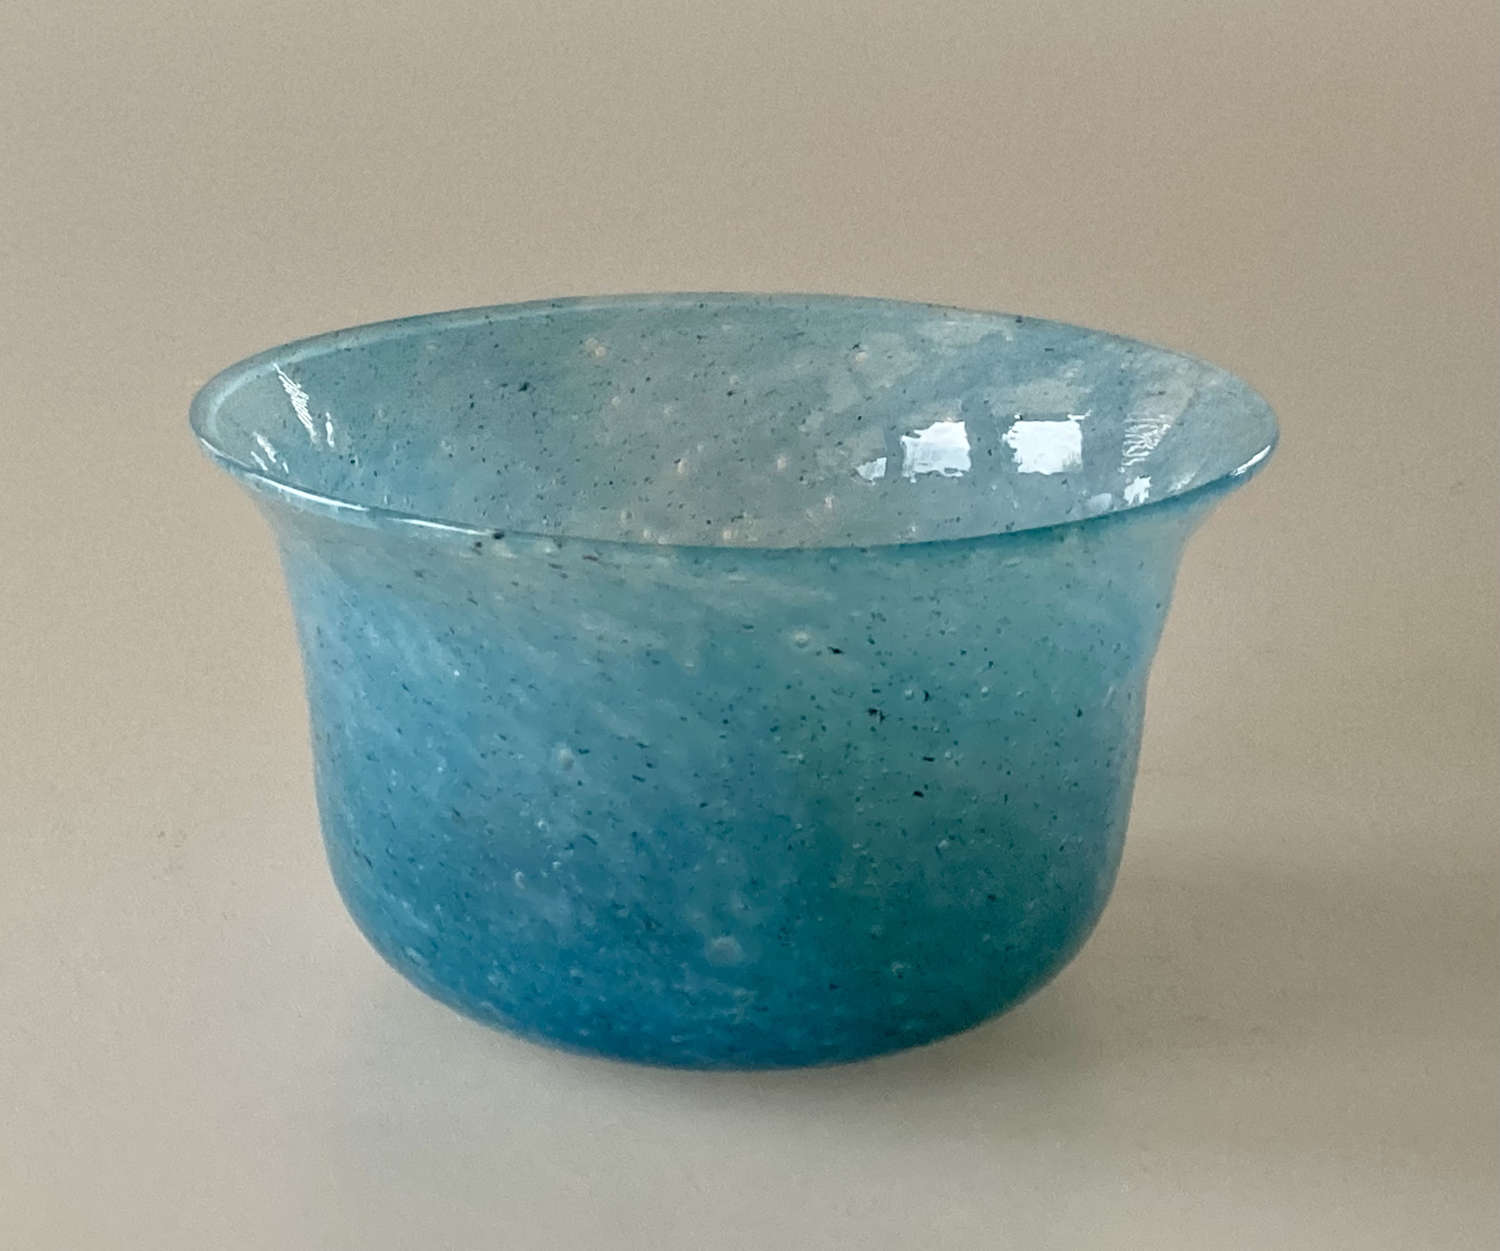 Small cloudy bowl